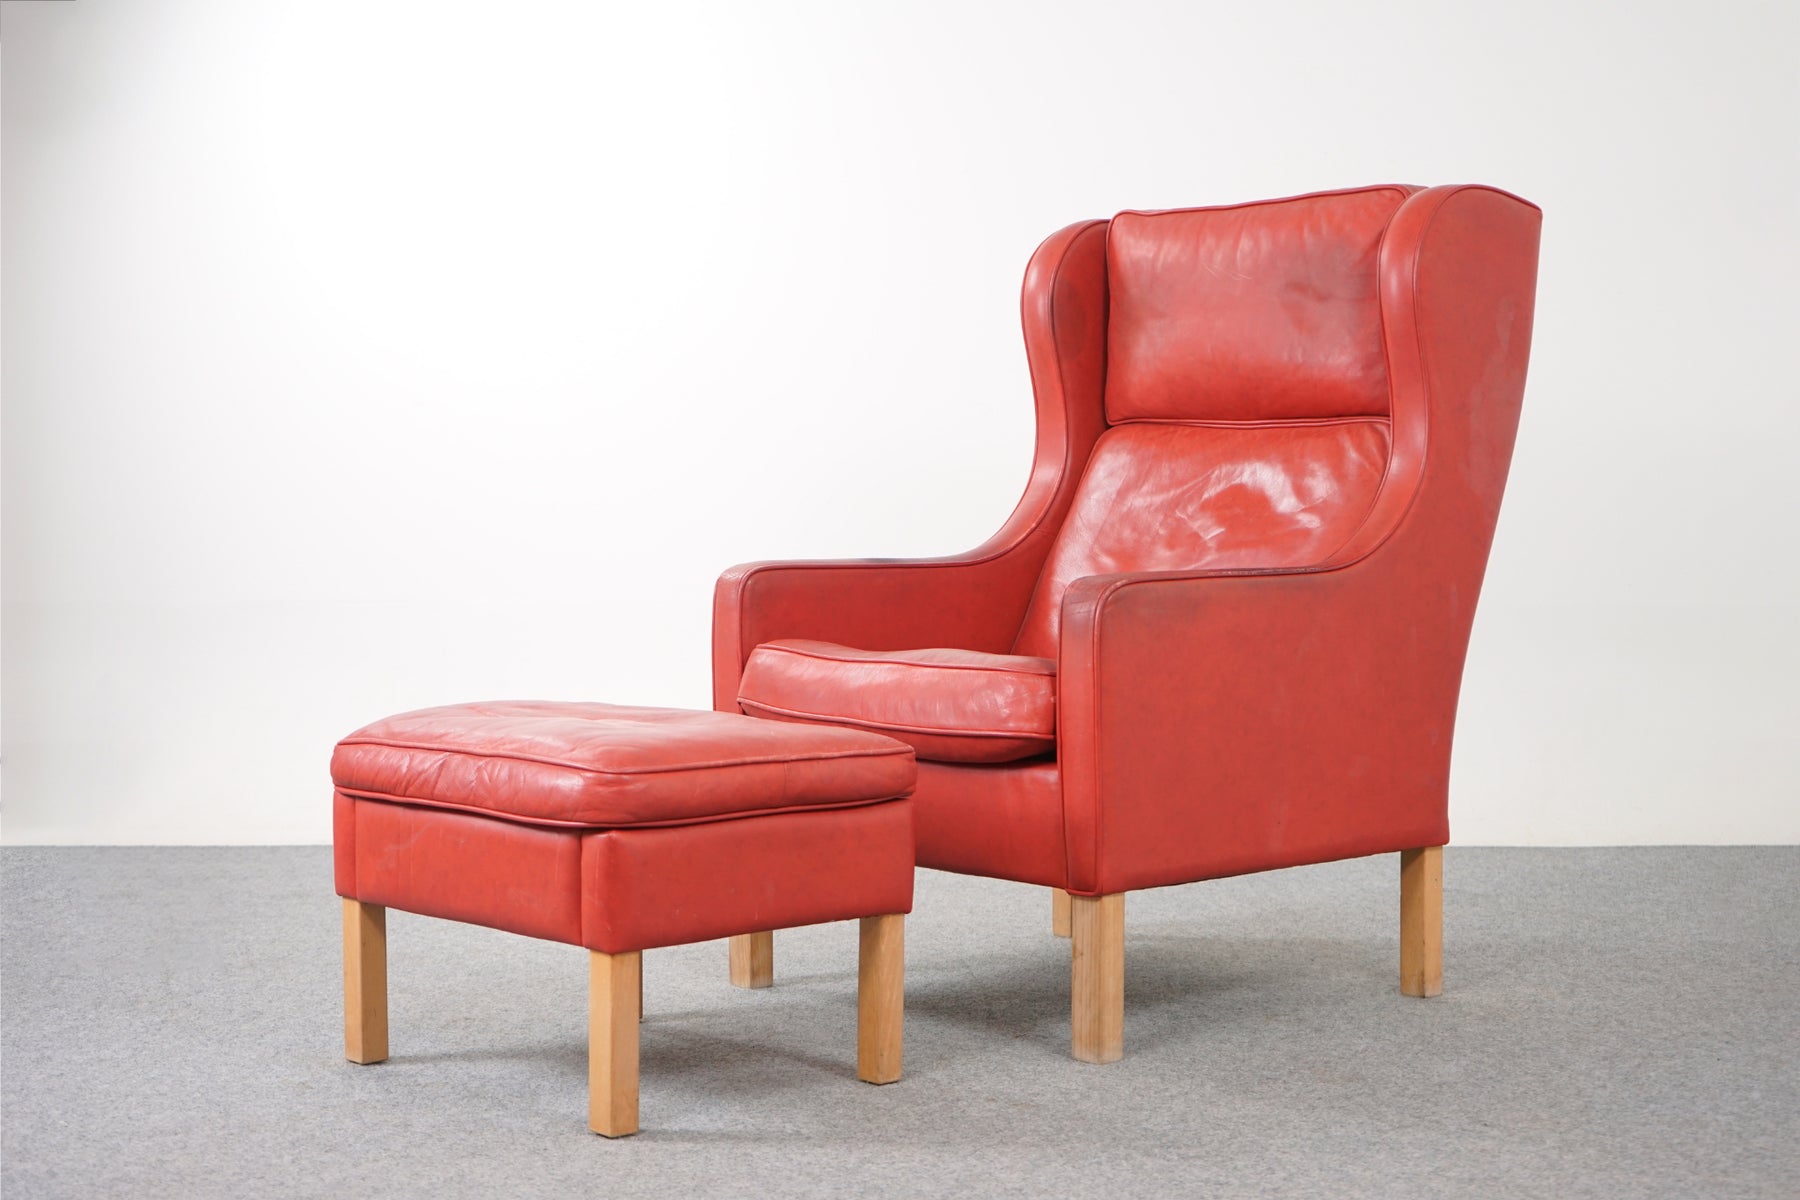 SALE - Leather Lounge Chair + Footstool - (320-111)